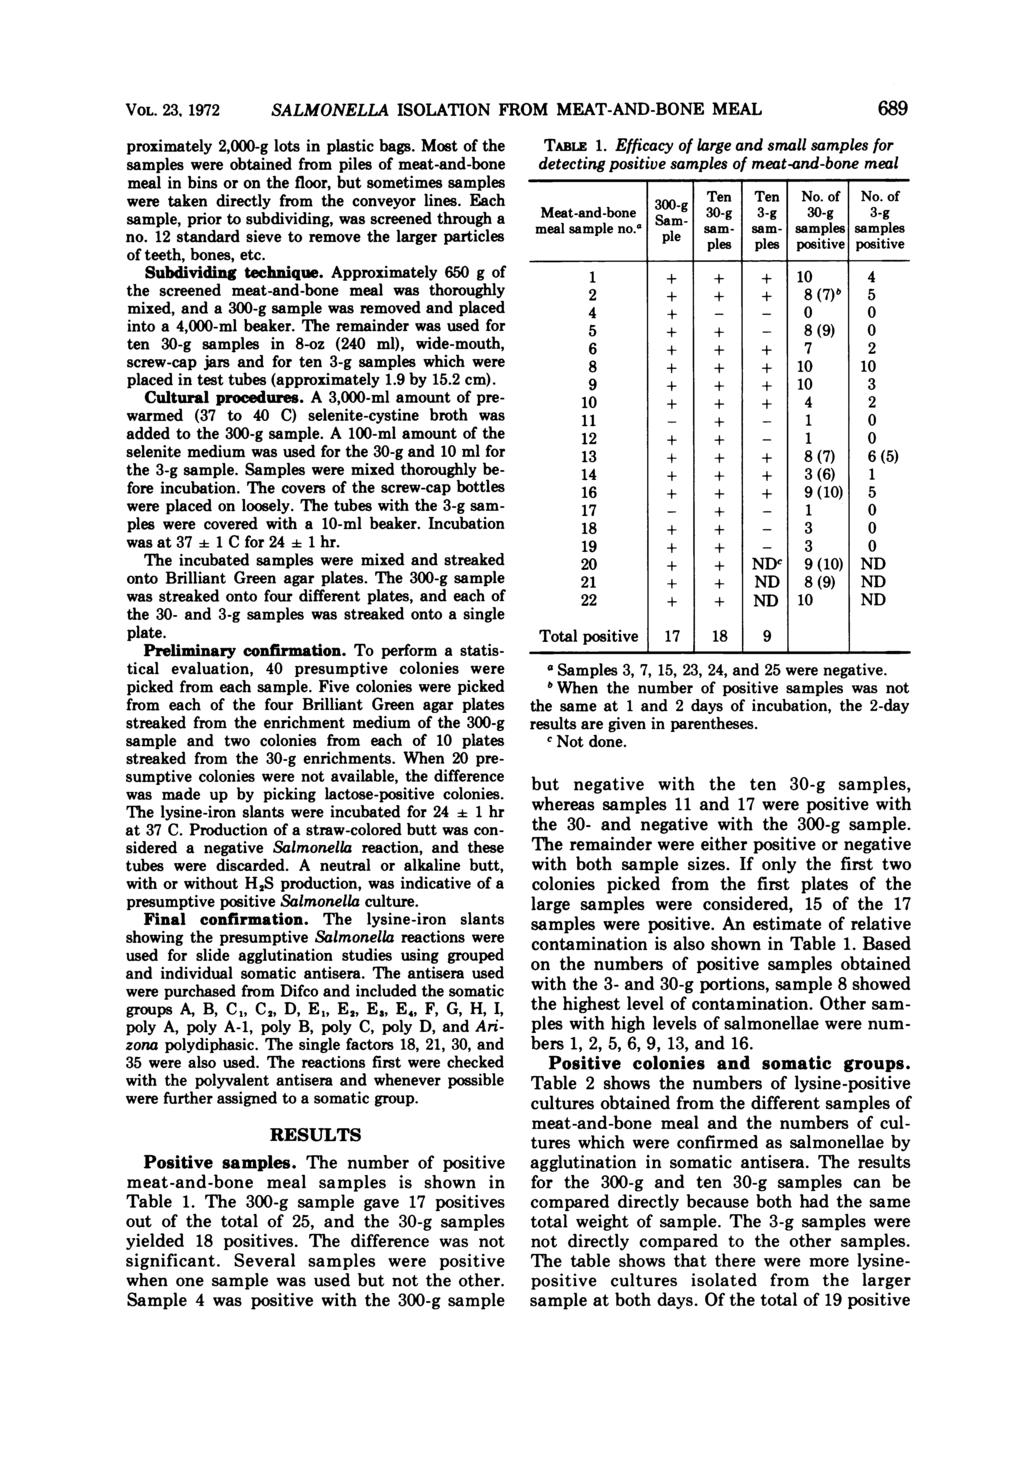 VOL. 23, 1972 SALMONELLA ISOLATION FROM MEAT-AND-BONE MEAL proximately 2,000-g lots in plastic bags.